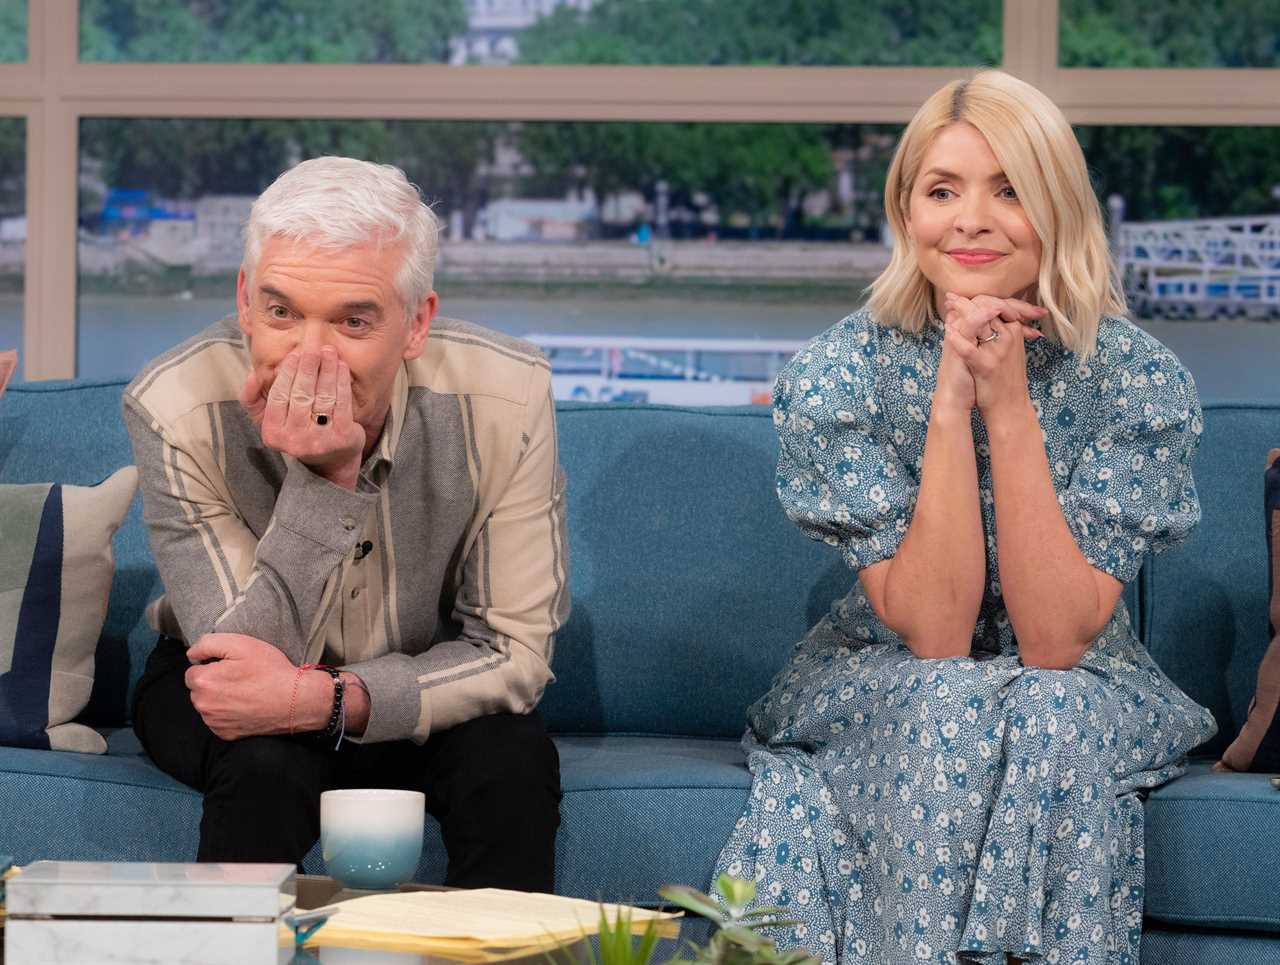 This Morning’s Phillip Schofield branded ‘obnoxious, horrible man’ who ‘should not be on television’ by iconic TV star